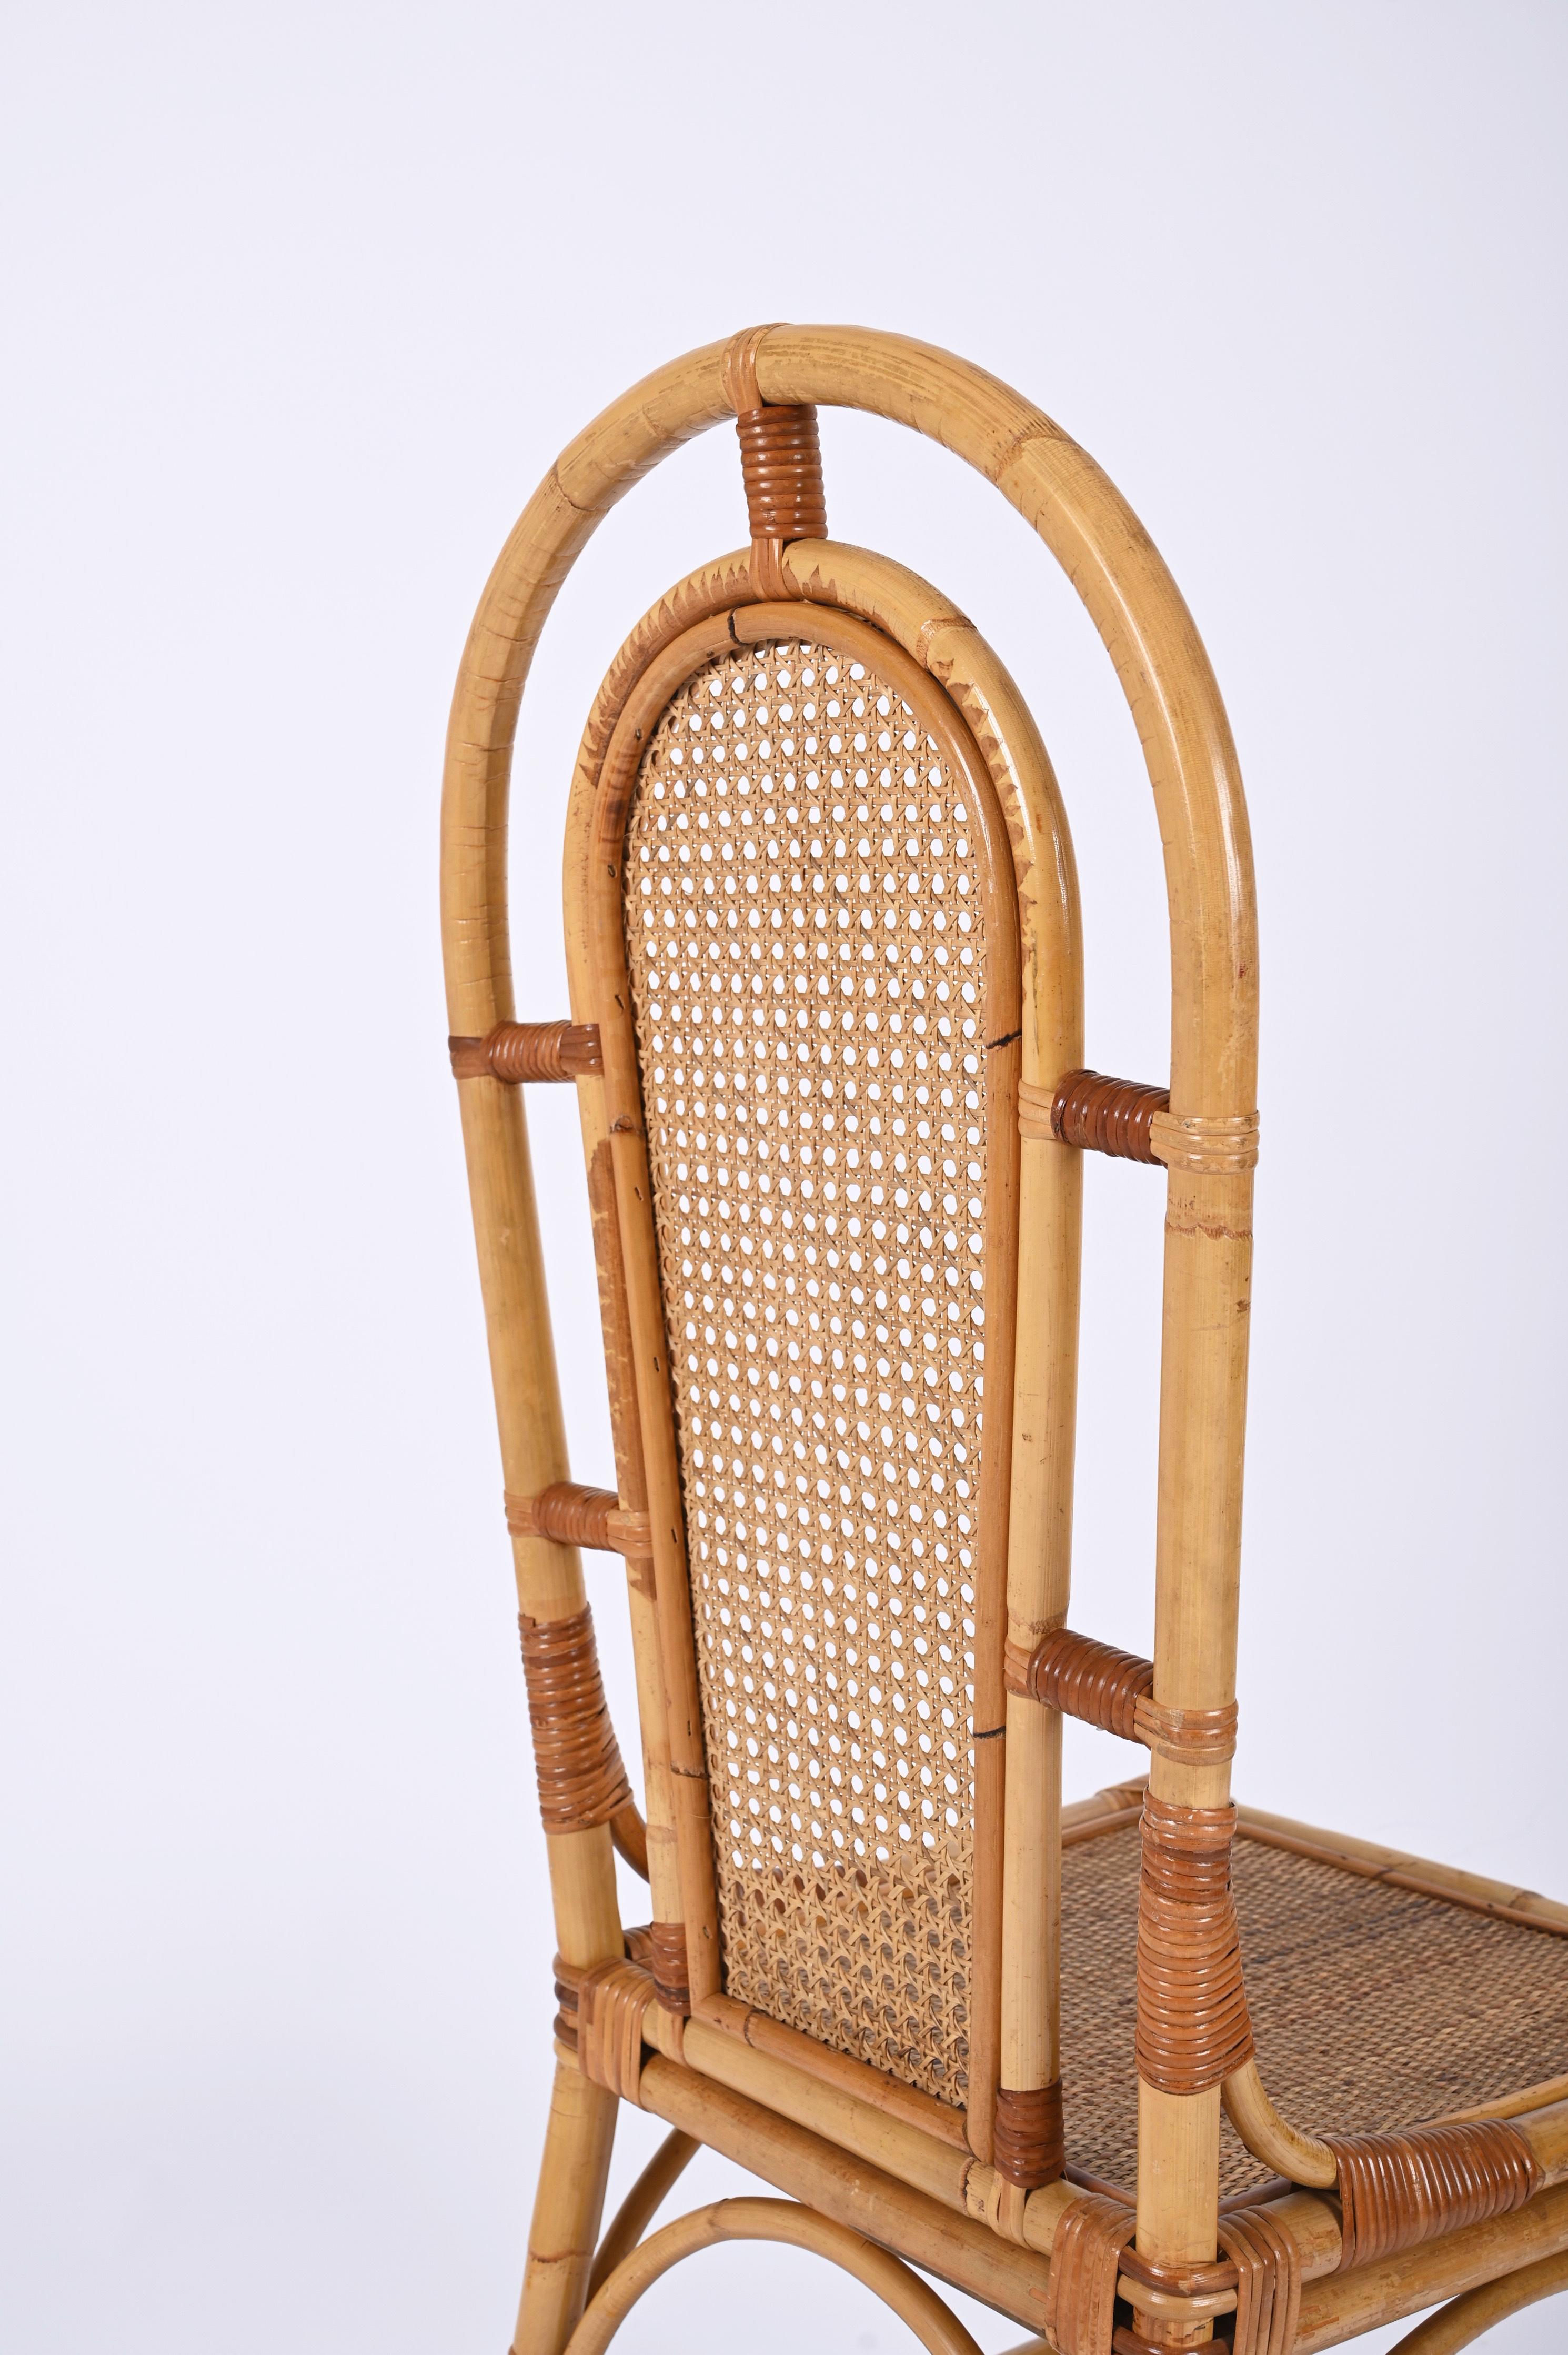 Sef of Four Bamboo and Vienna Straw Chairs, Vivai Del Sud, Italy 1970s For Sale 3